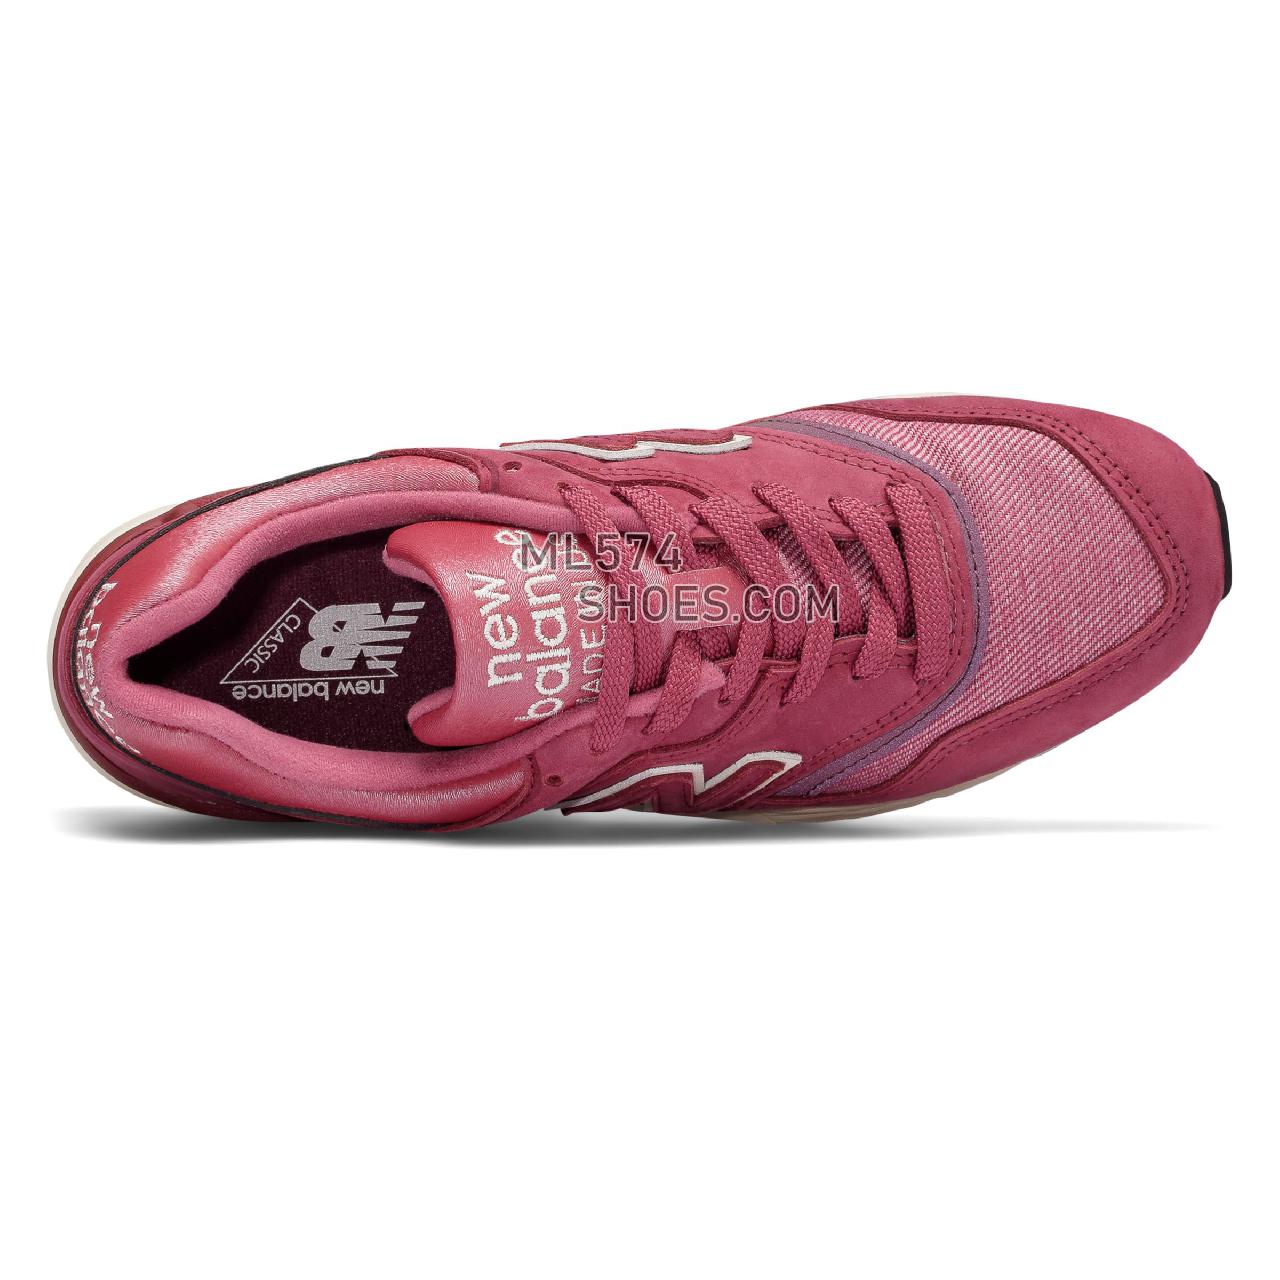 New Balance Made in US 997 The Retrospective Woman - Men's Made in US 997 The Retrospective Woman - Dragon Fruit with Birch - W997ER